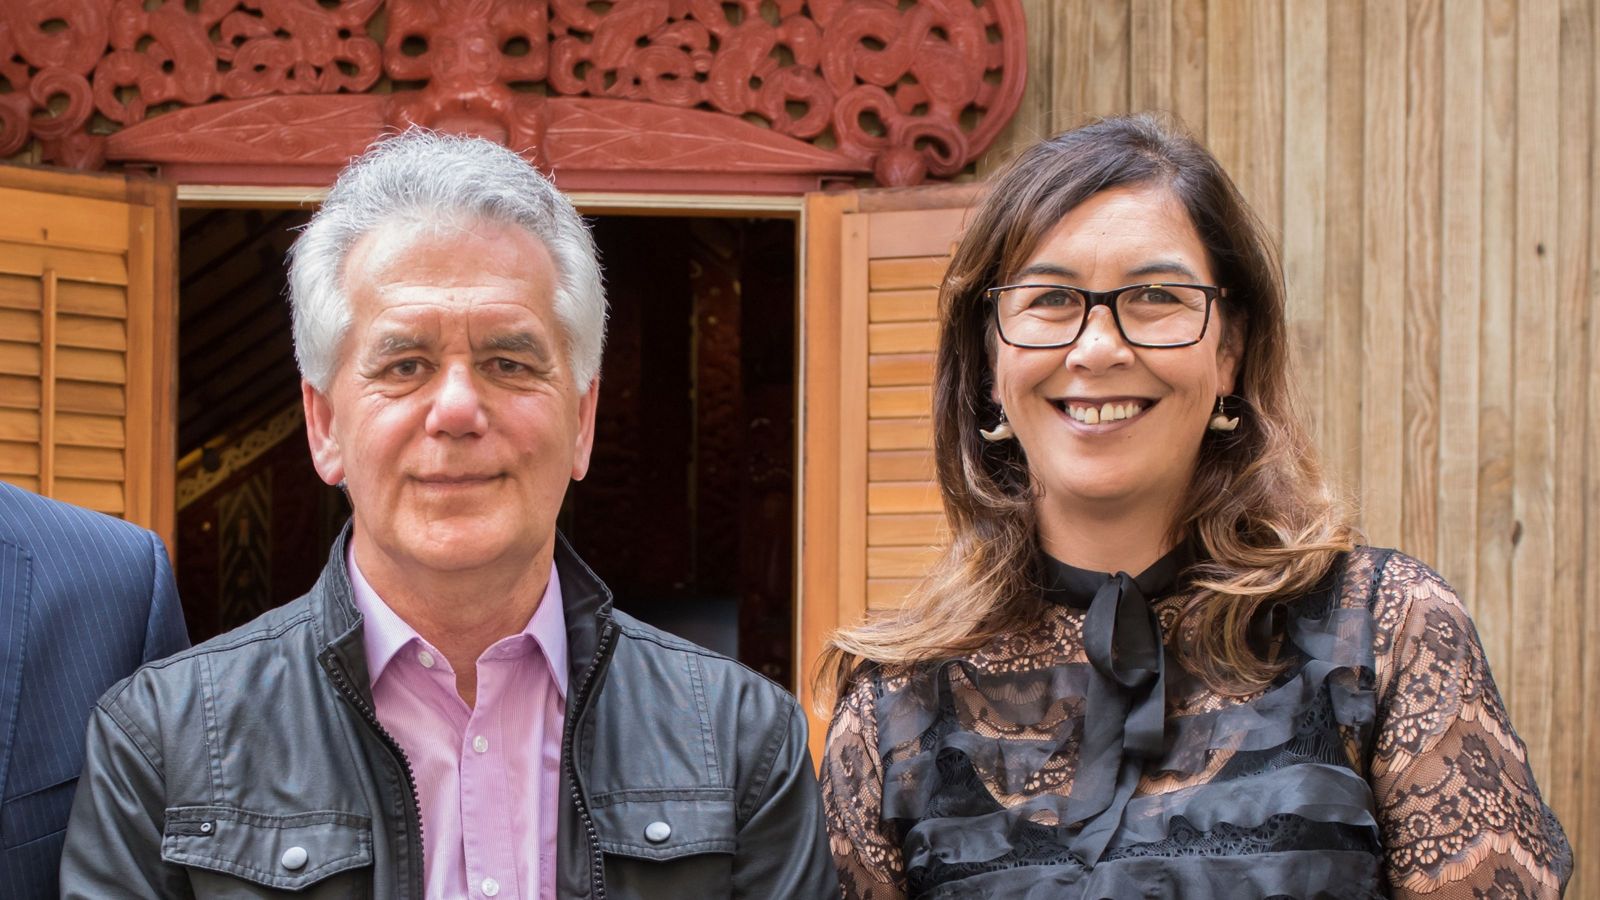 Man with grey hair and woman with dark hair in front of a marae door